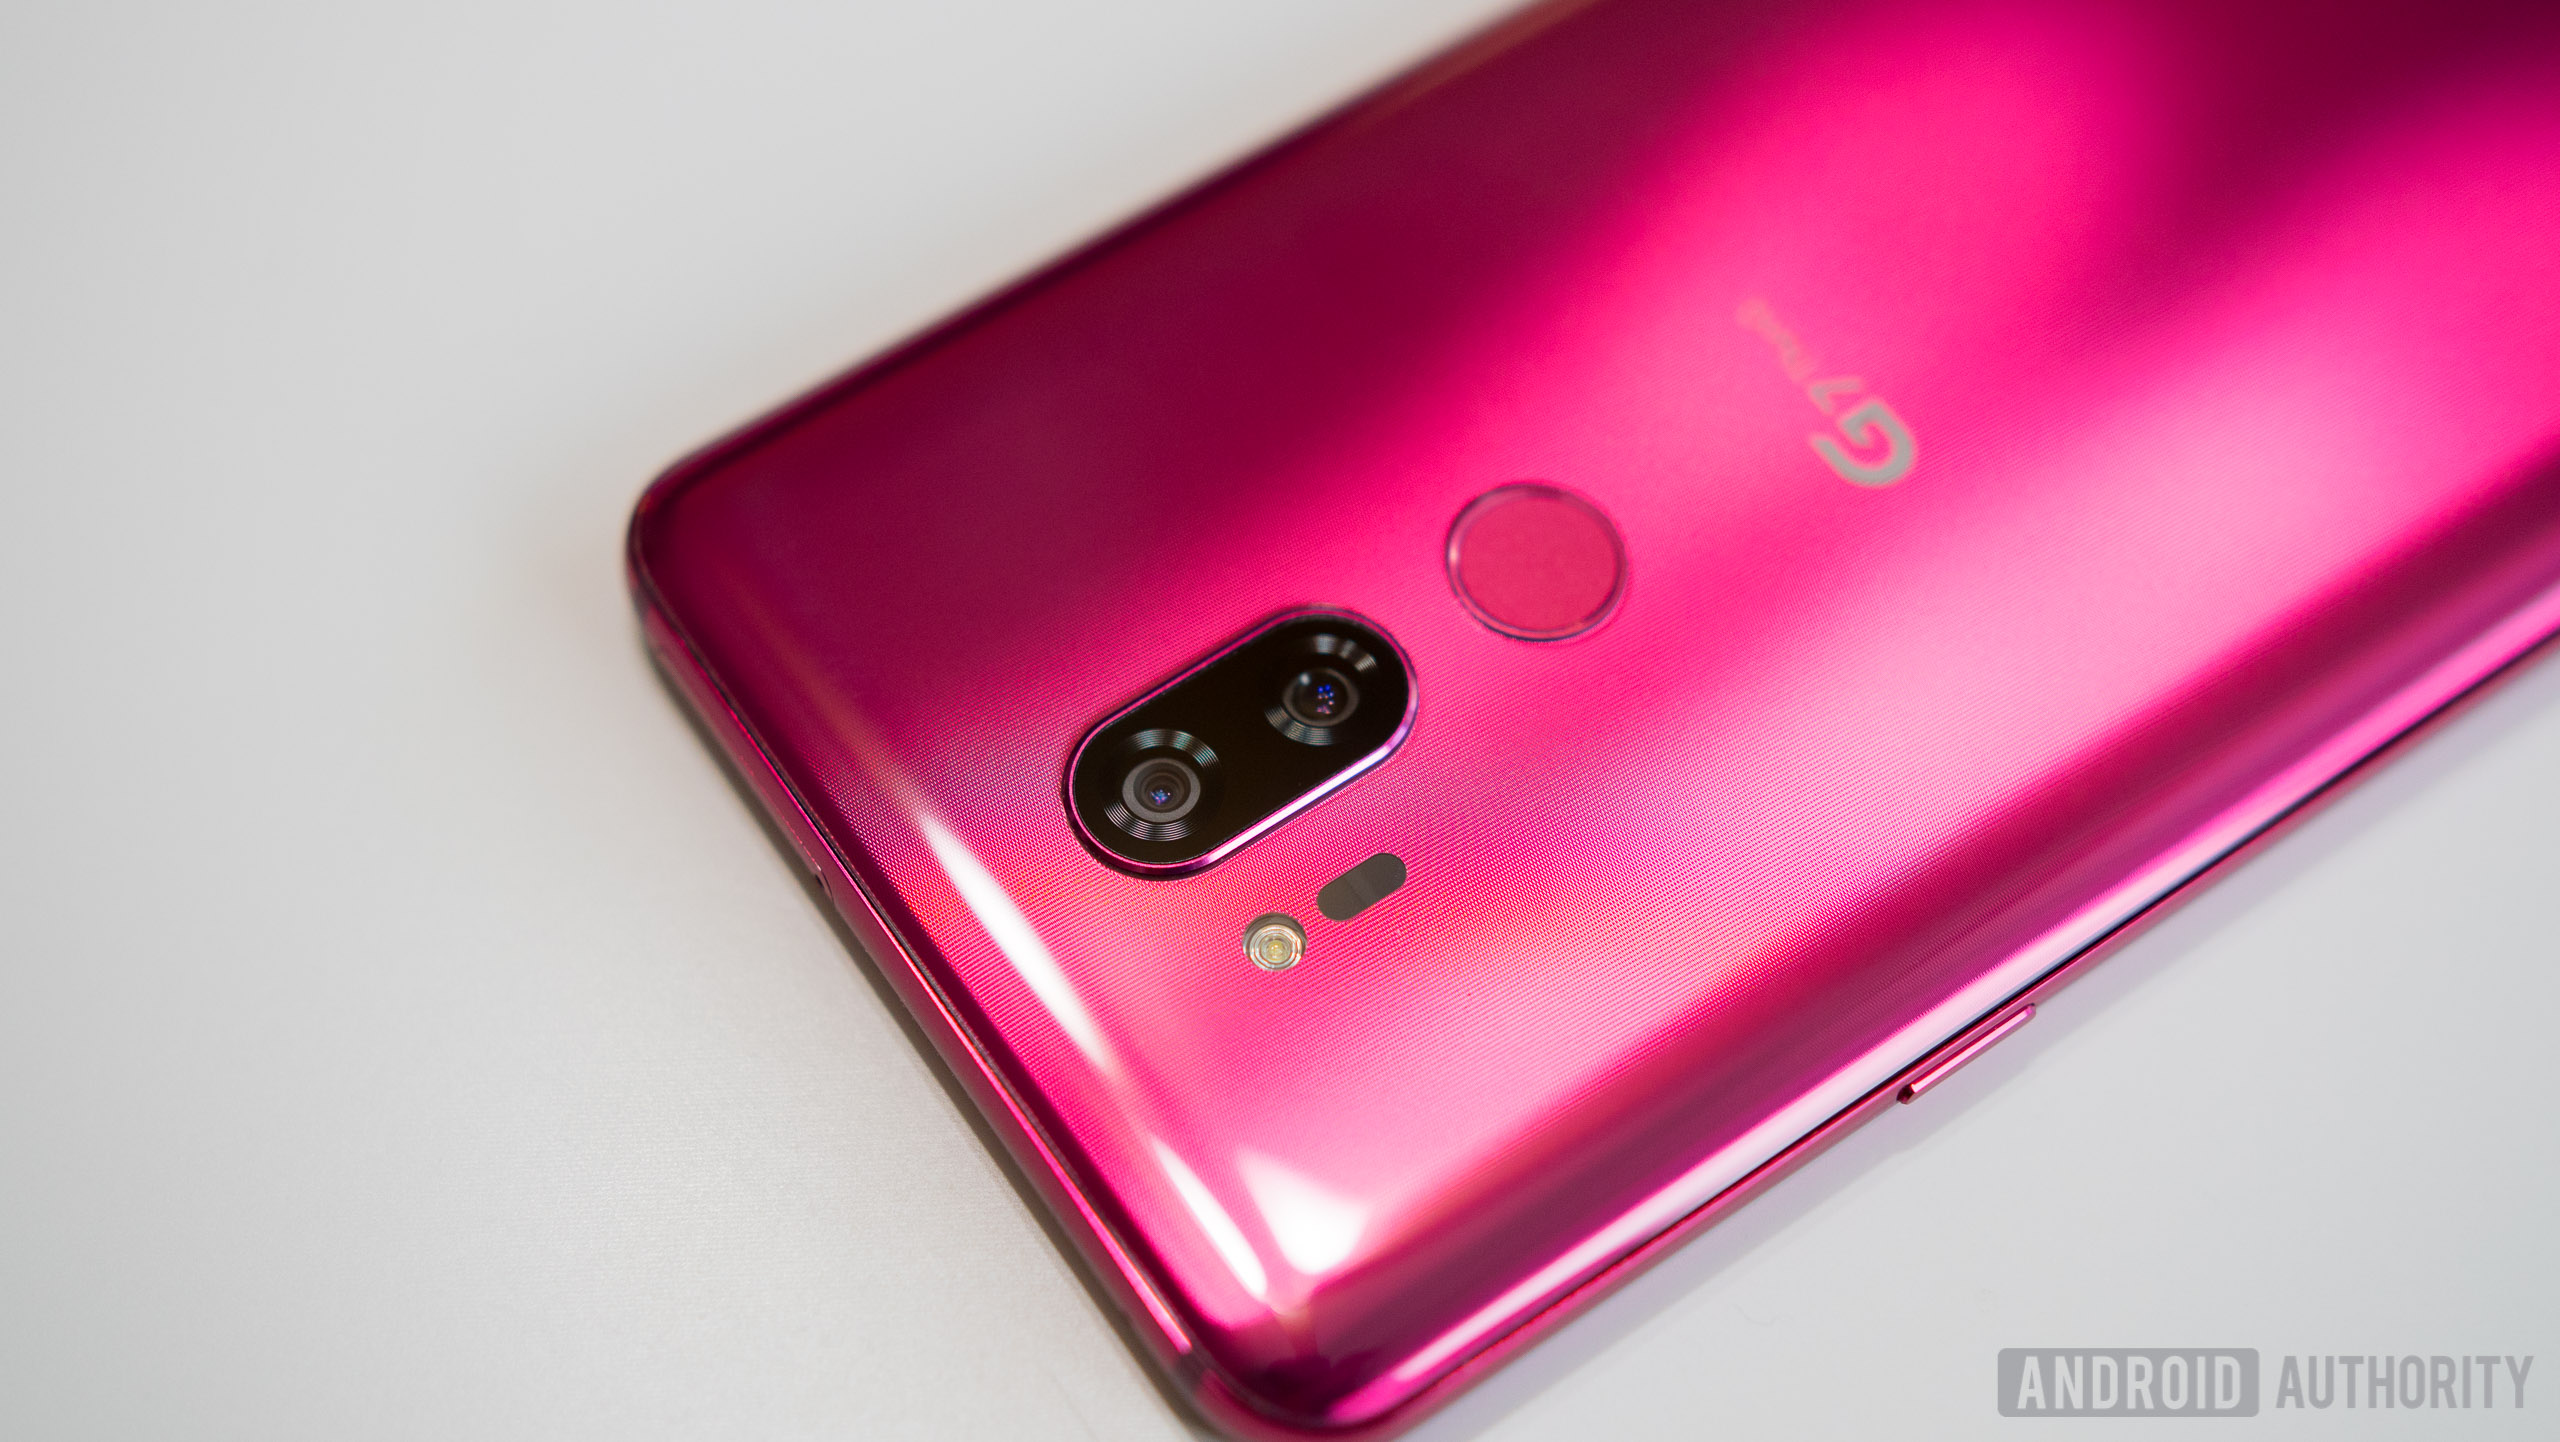 LG G7 ThinQ dual cameras and finger scanner